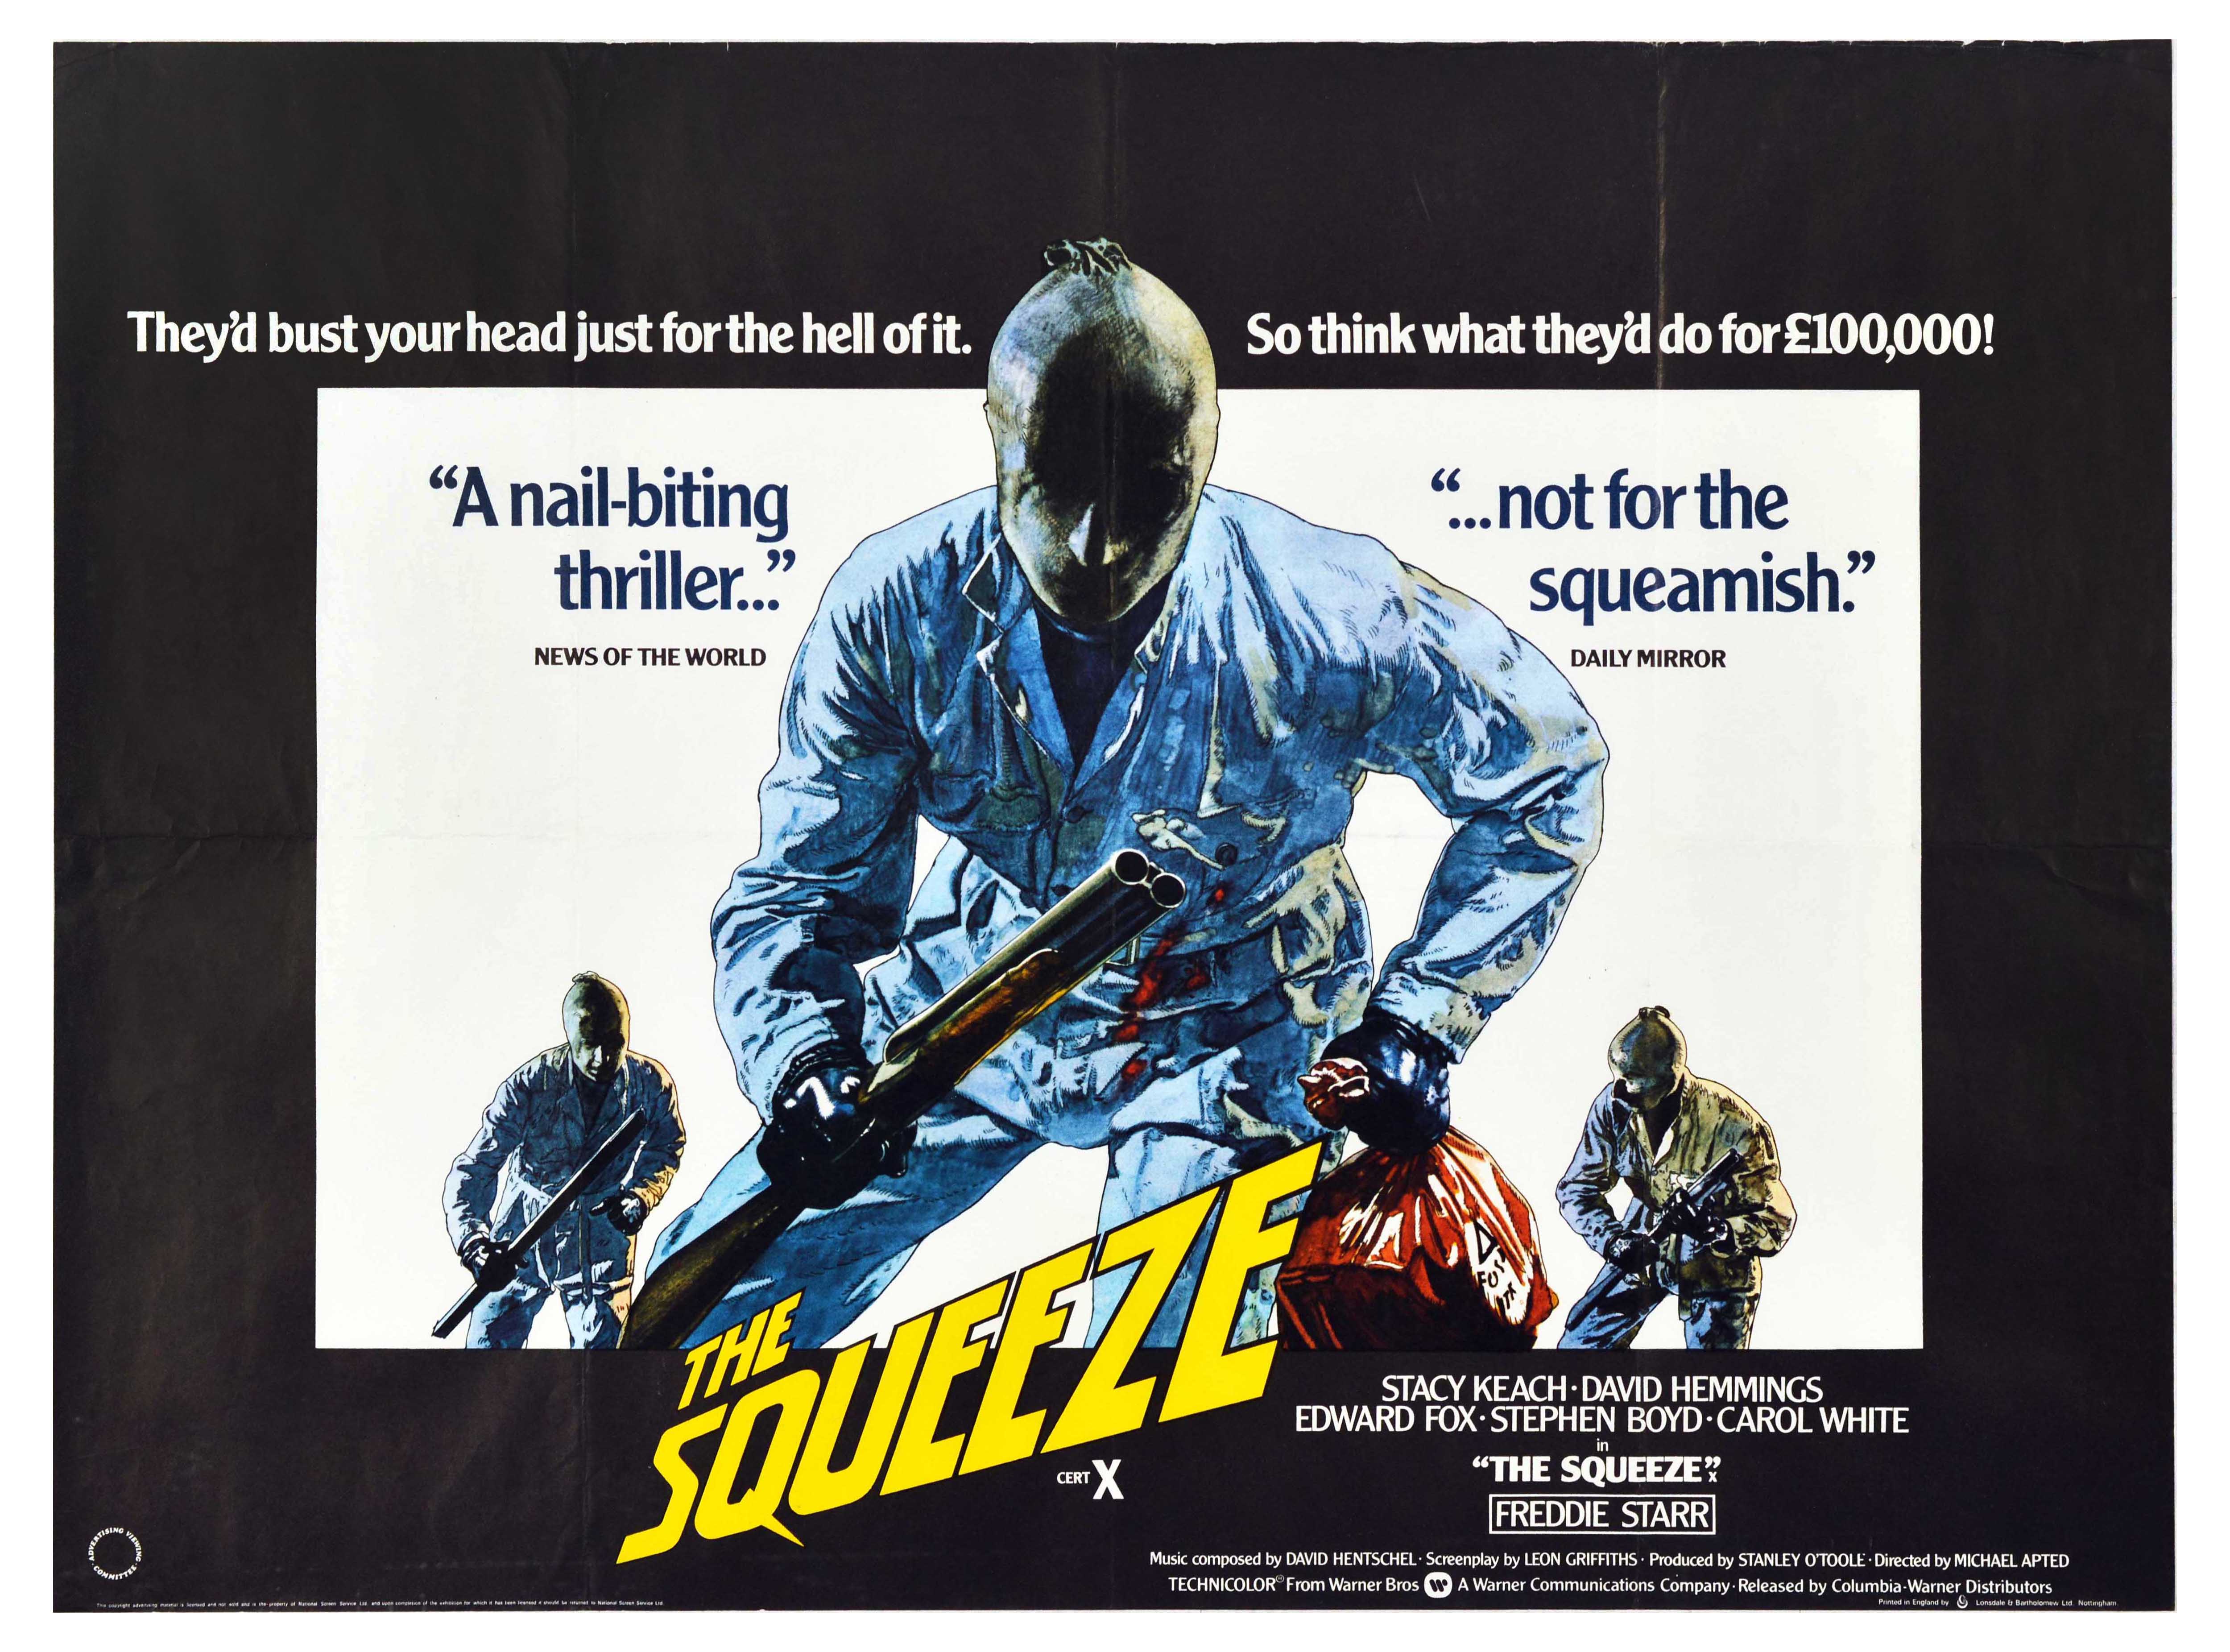 Film Poster The Squeeze British Gangster Thriller